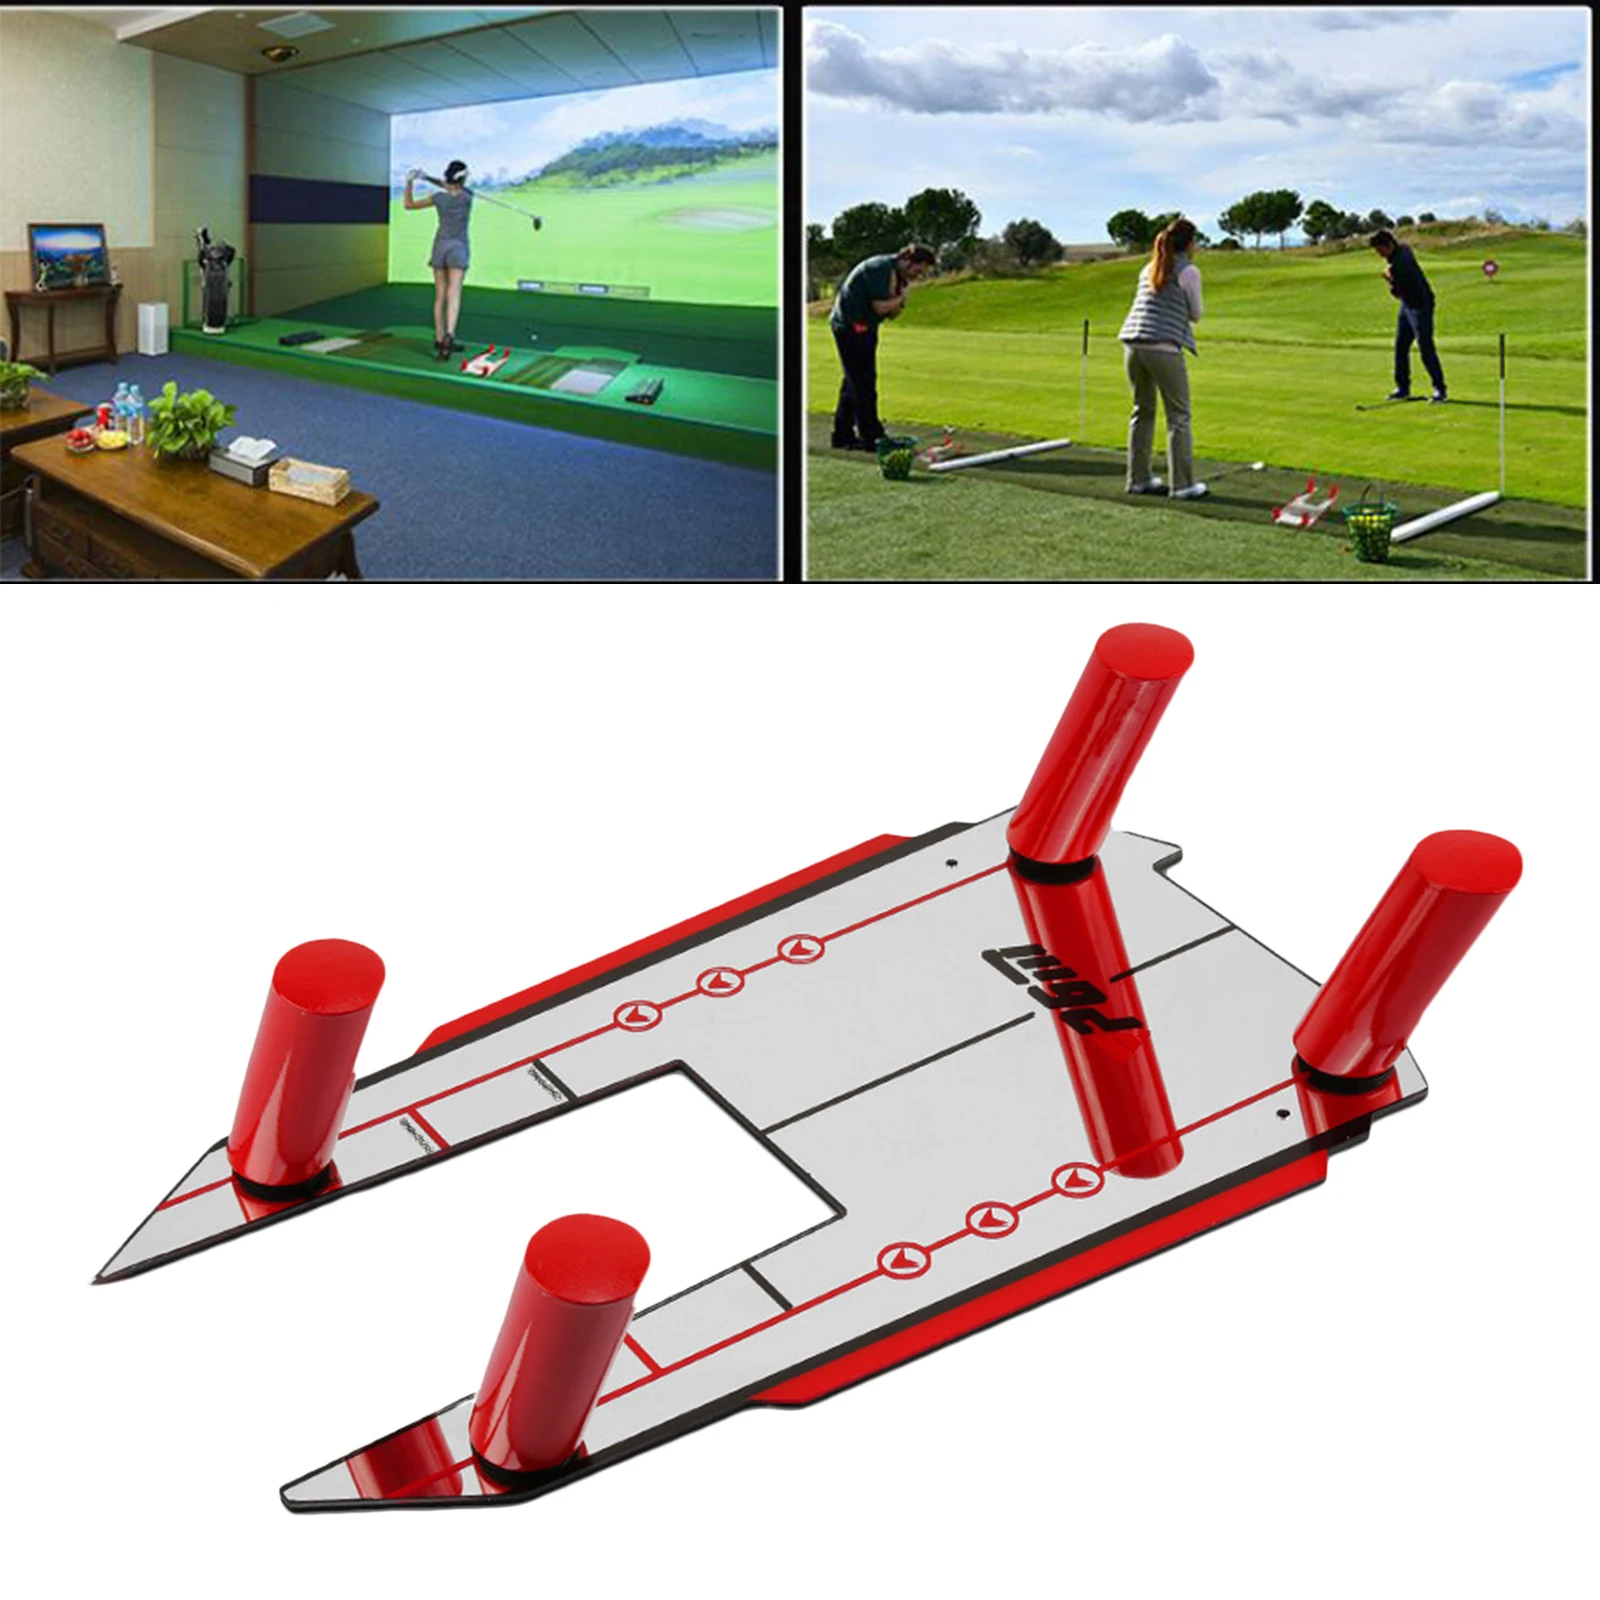 Golf Putting Alignment Mirror - Improve Your Putting Skills with This Golf Training Aid - Putt with Confidence & Accurately